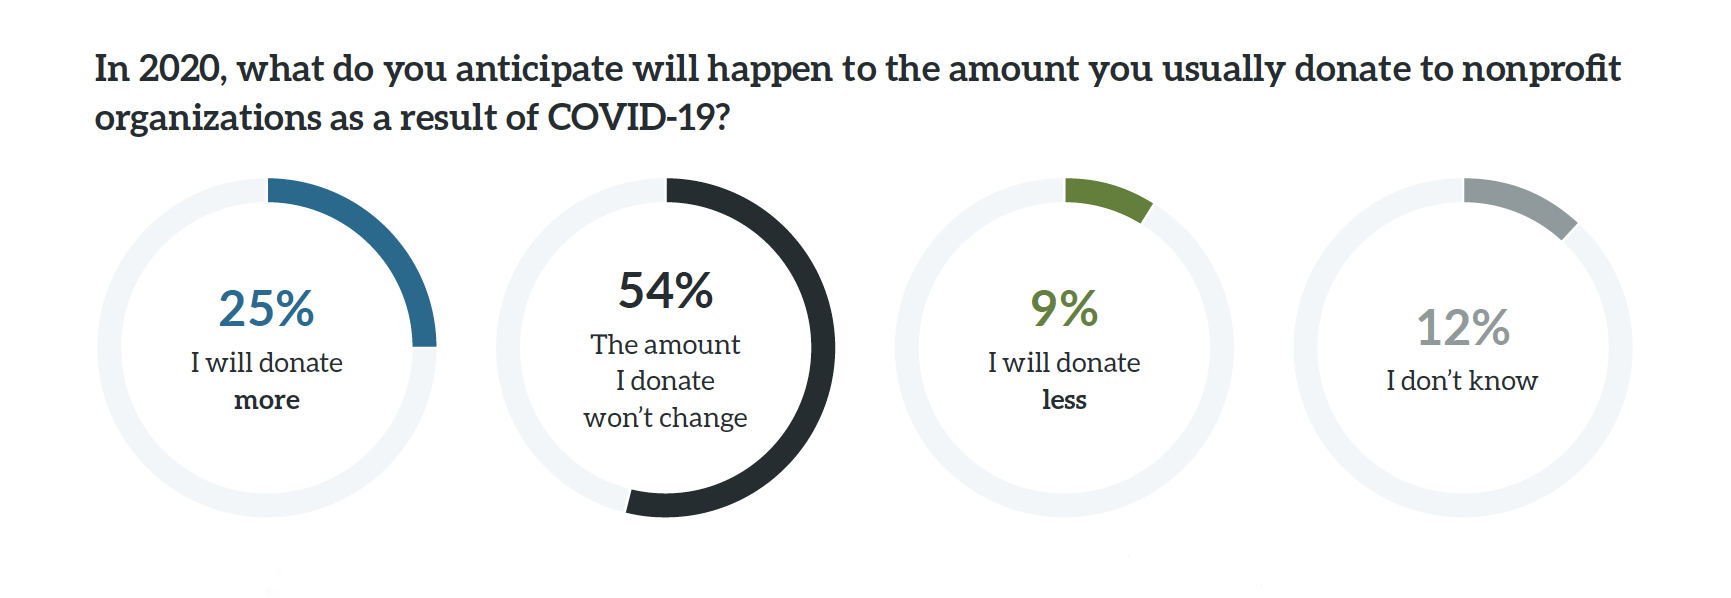 COVID-19 impact on financial support for nonprofits